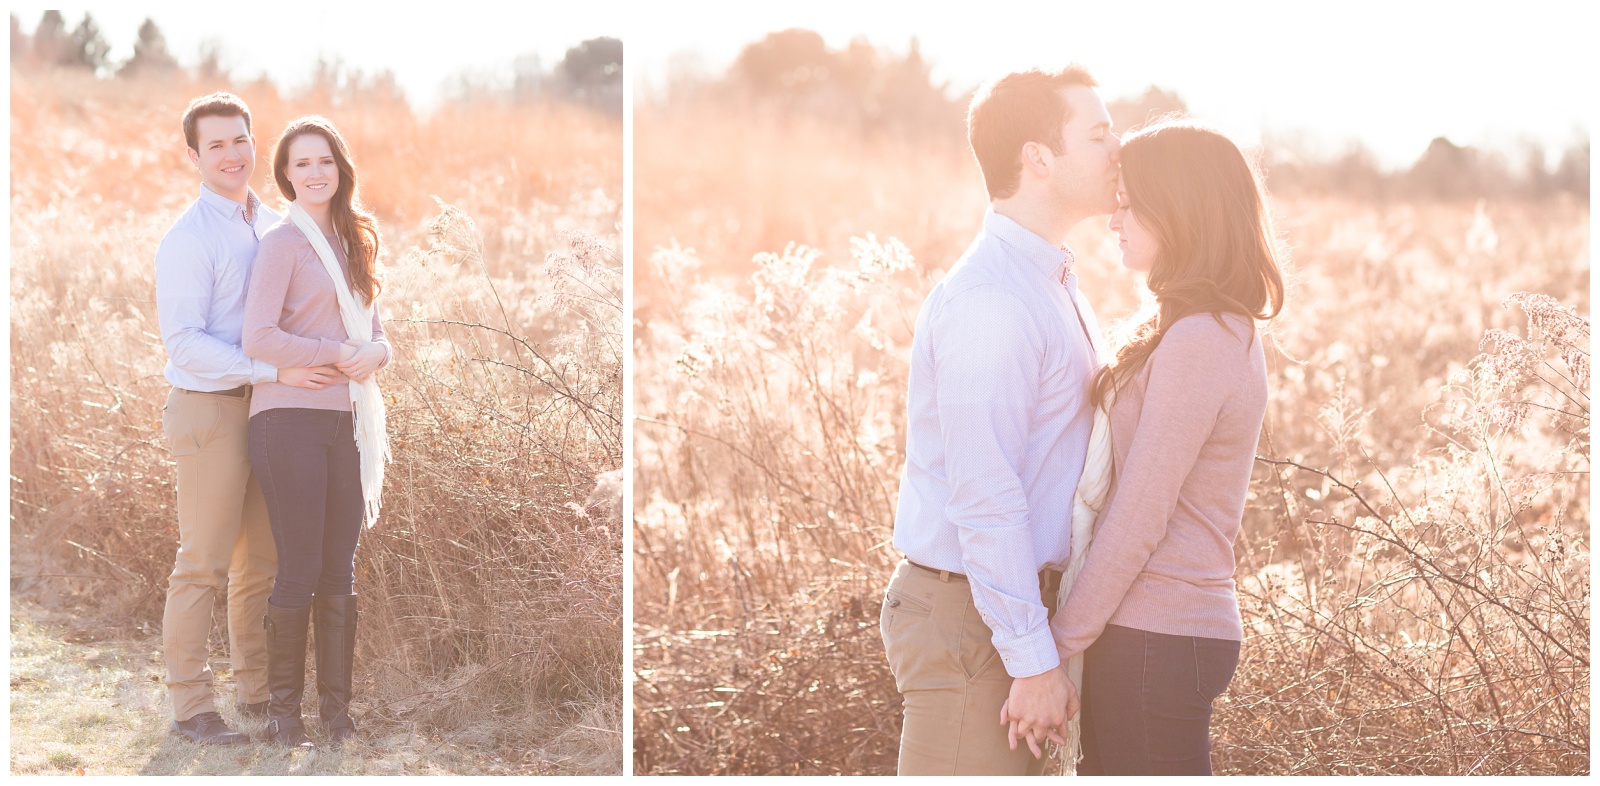 Couple standing in front of field of tall grass\forehead kiss